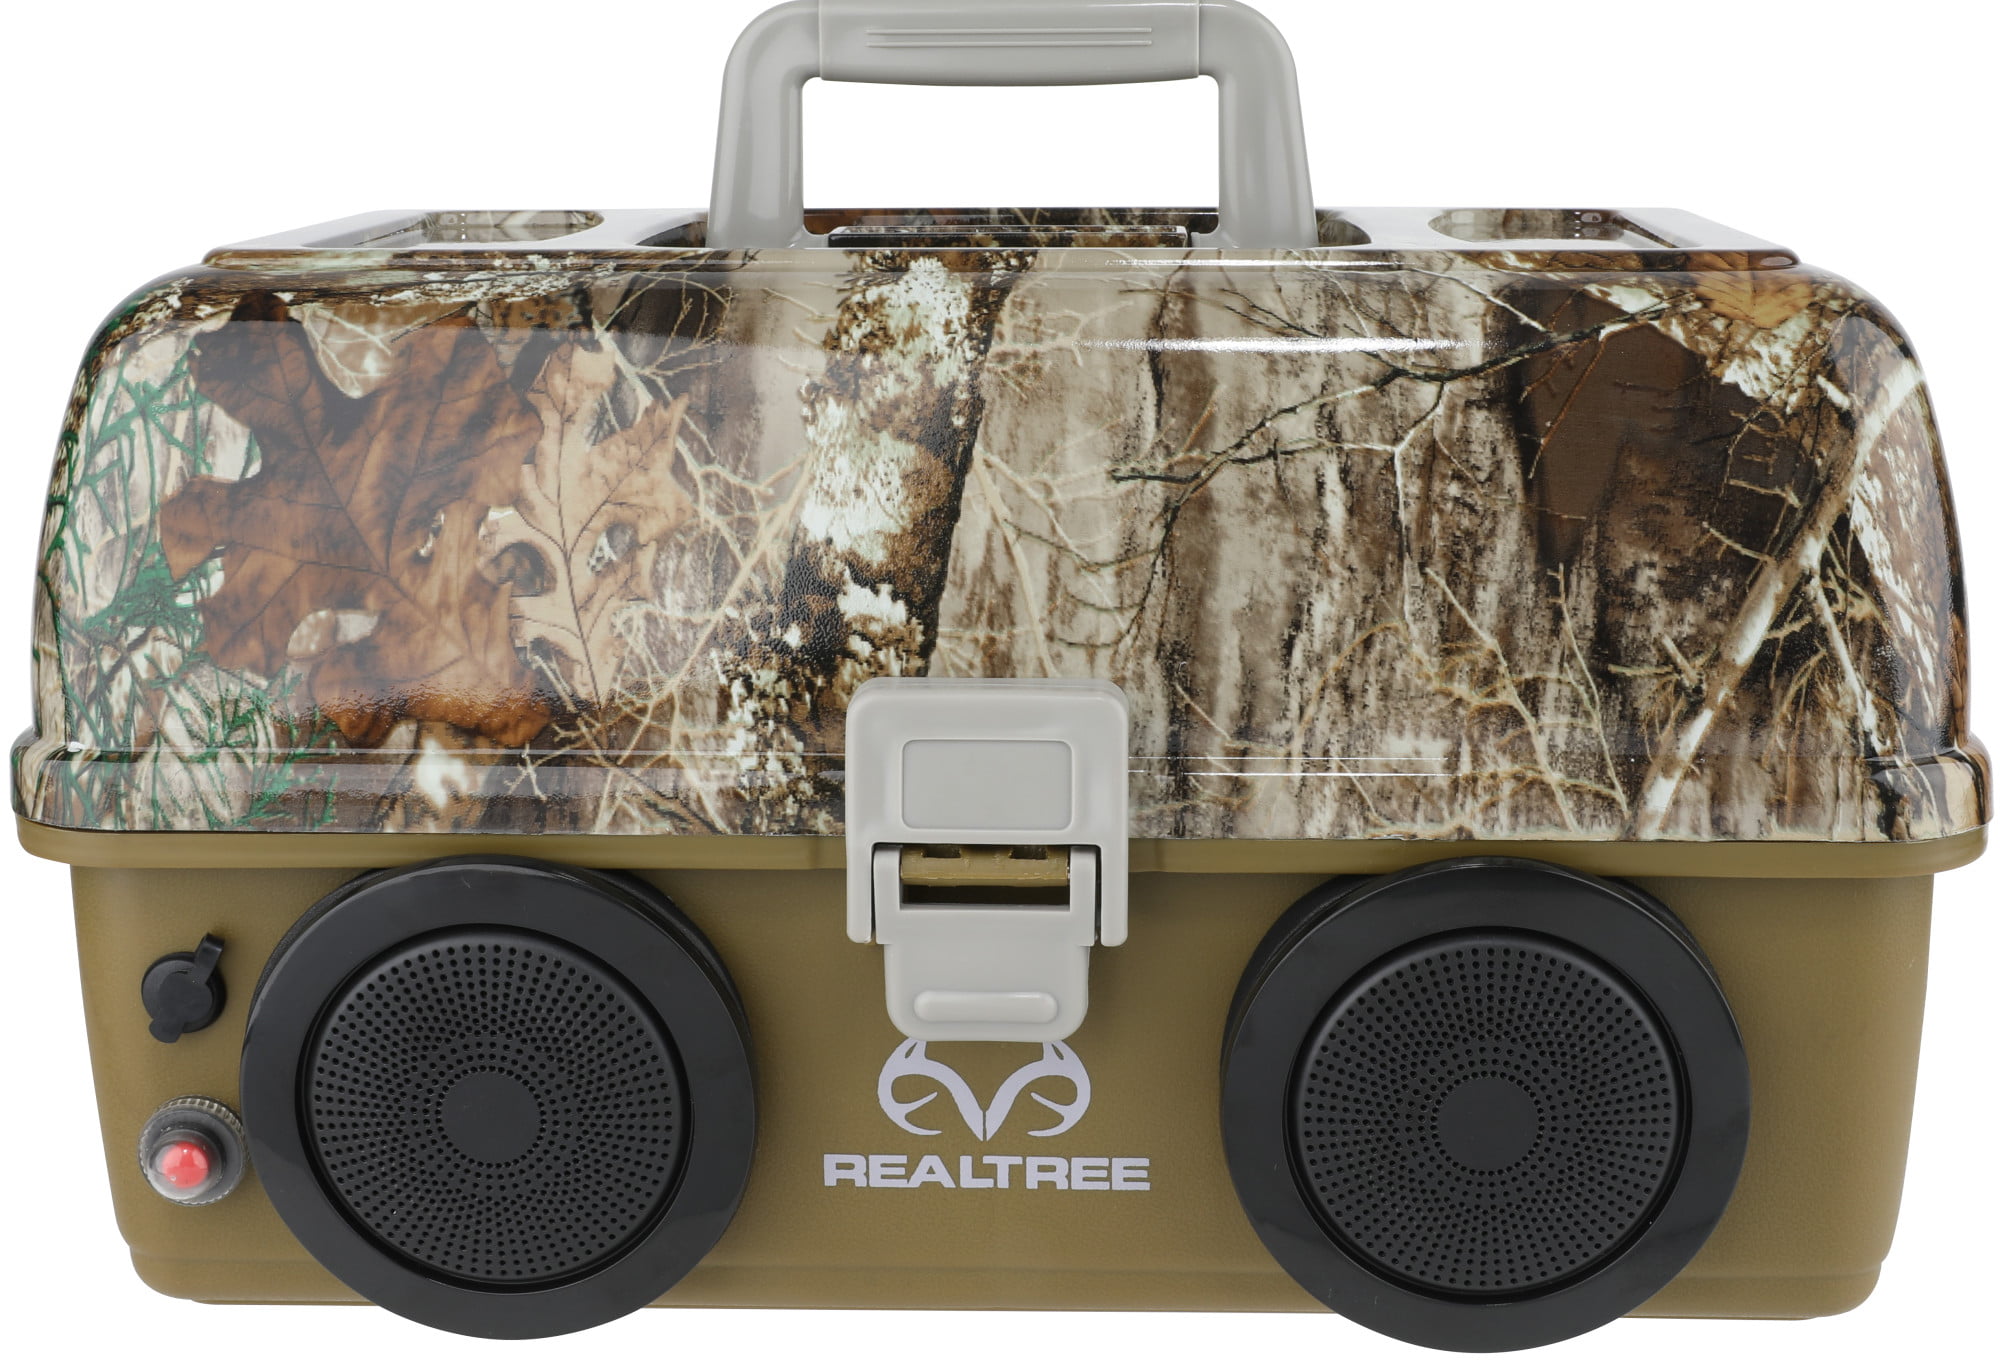 RealTree Fishing Tackle Box with Bluetooth Speakers in Camo Design